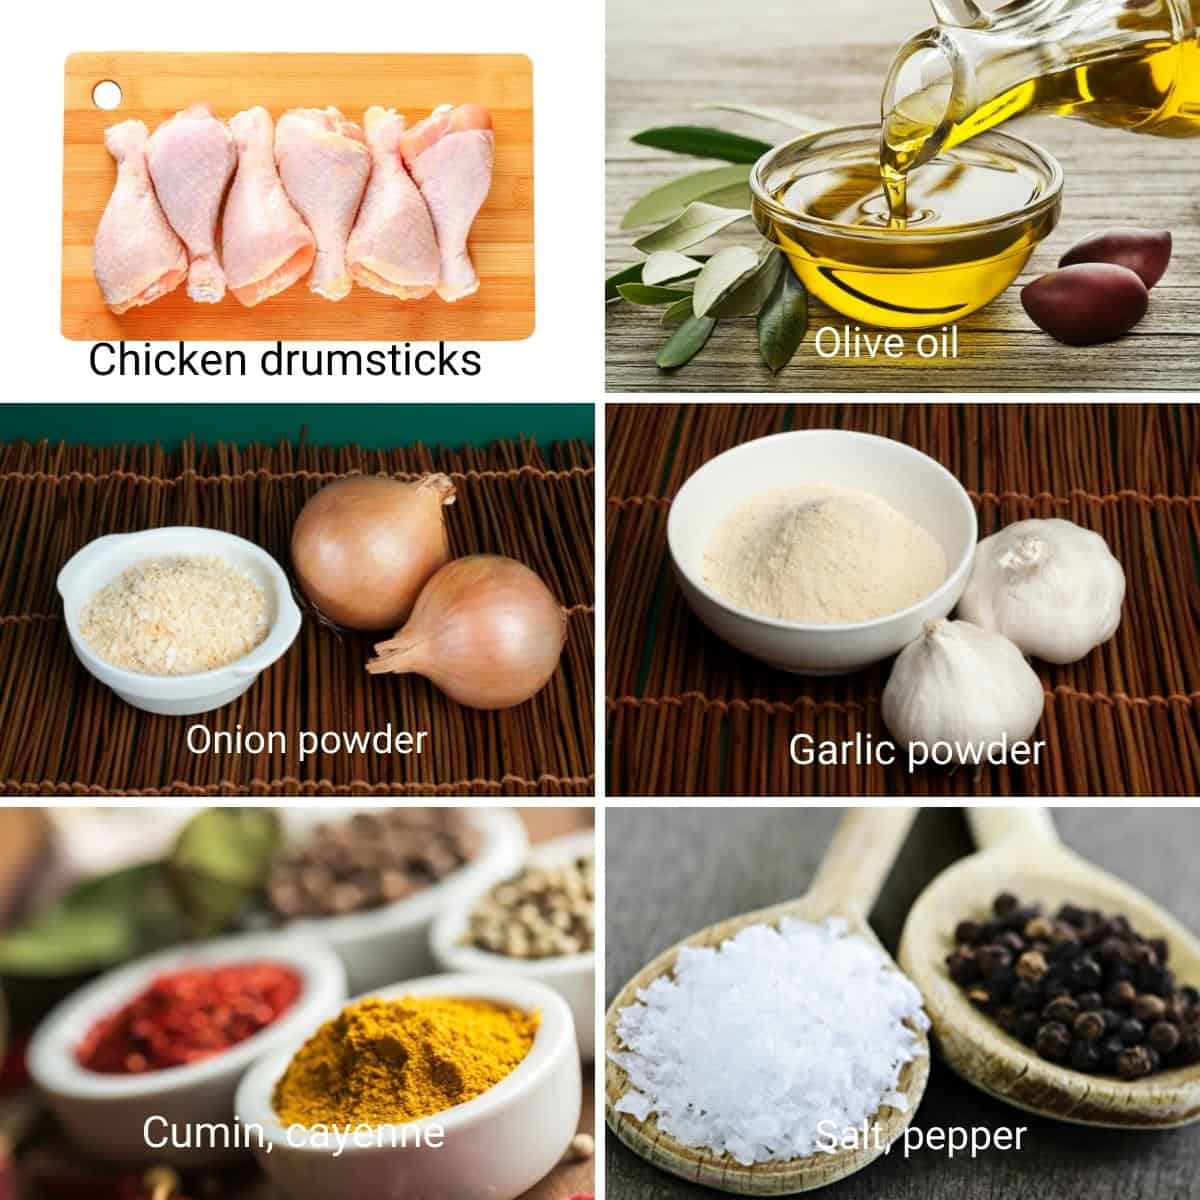 Ingredients for making chicken drumsticks in the oven.